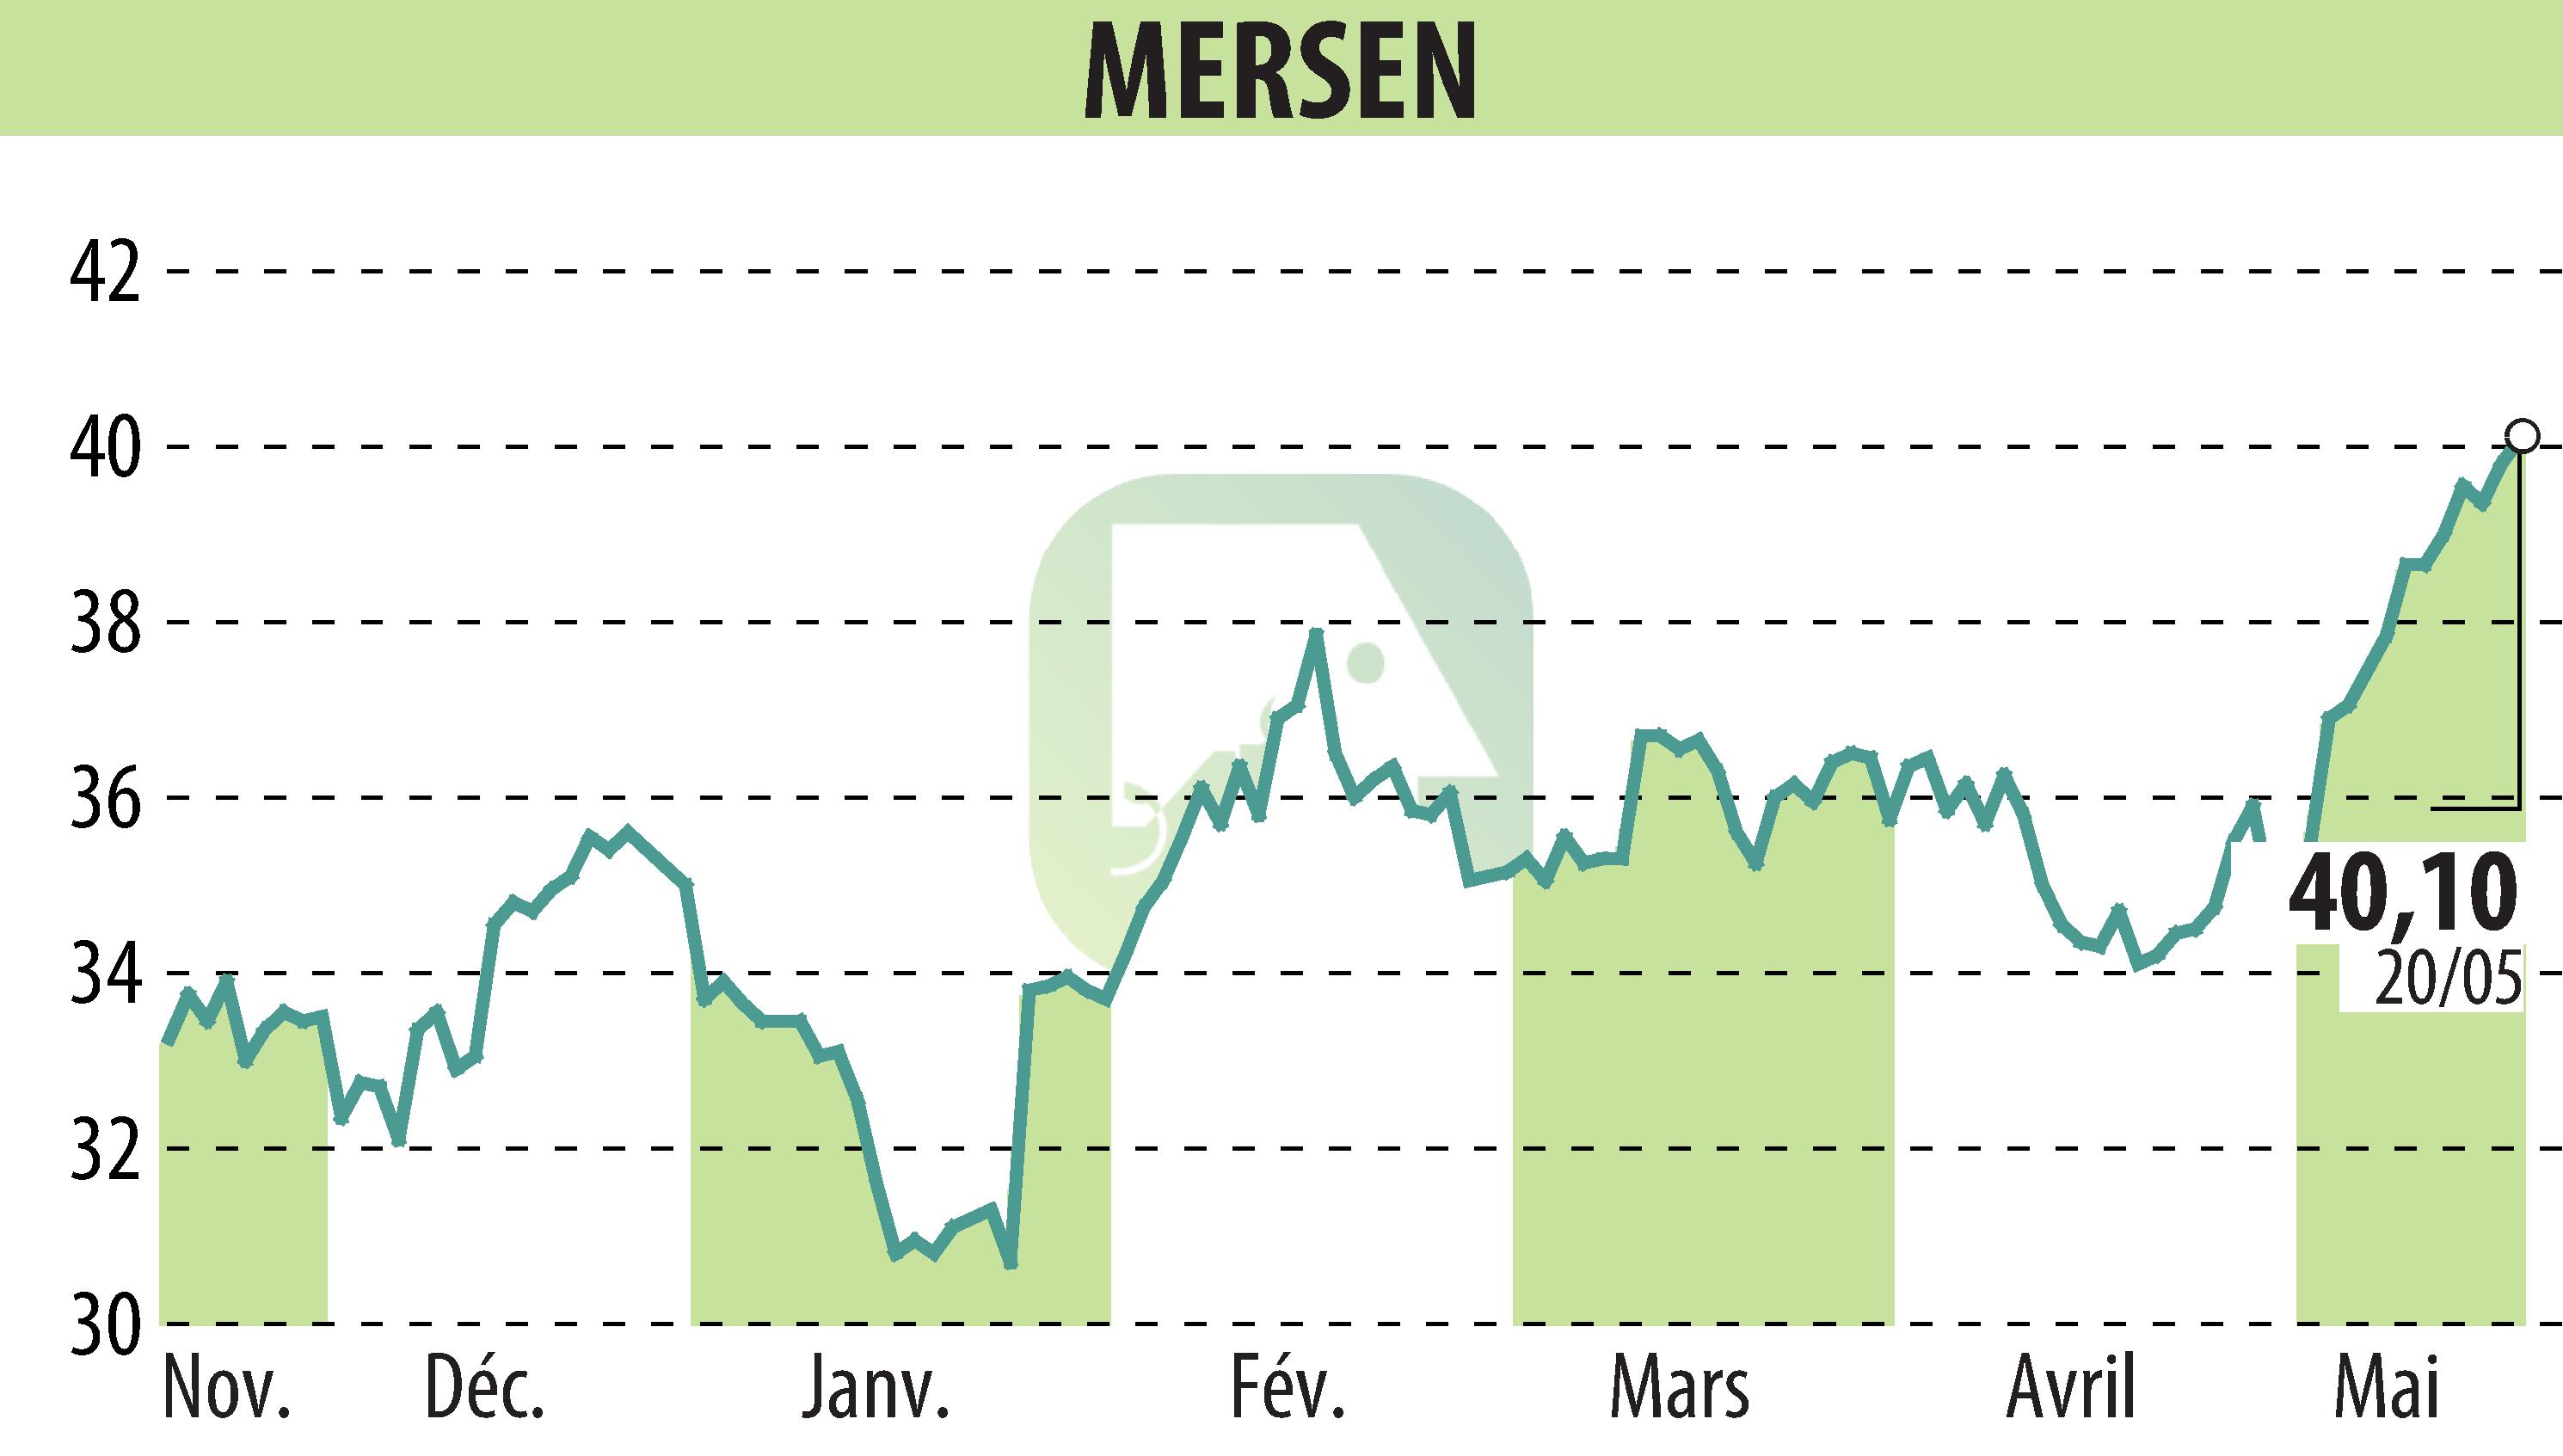 Stock price chart of MERSEN (EPA:MRN) showing fluctuations.